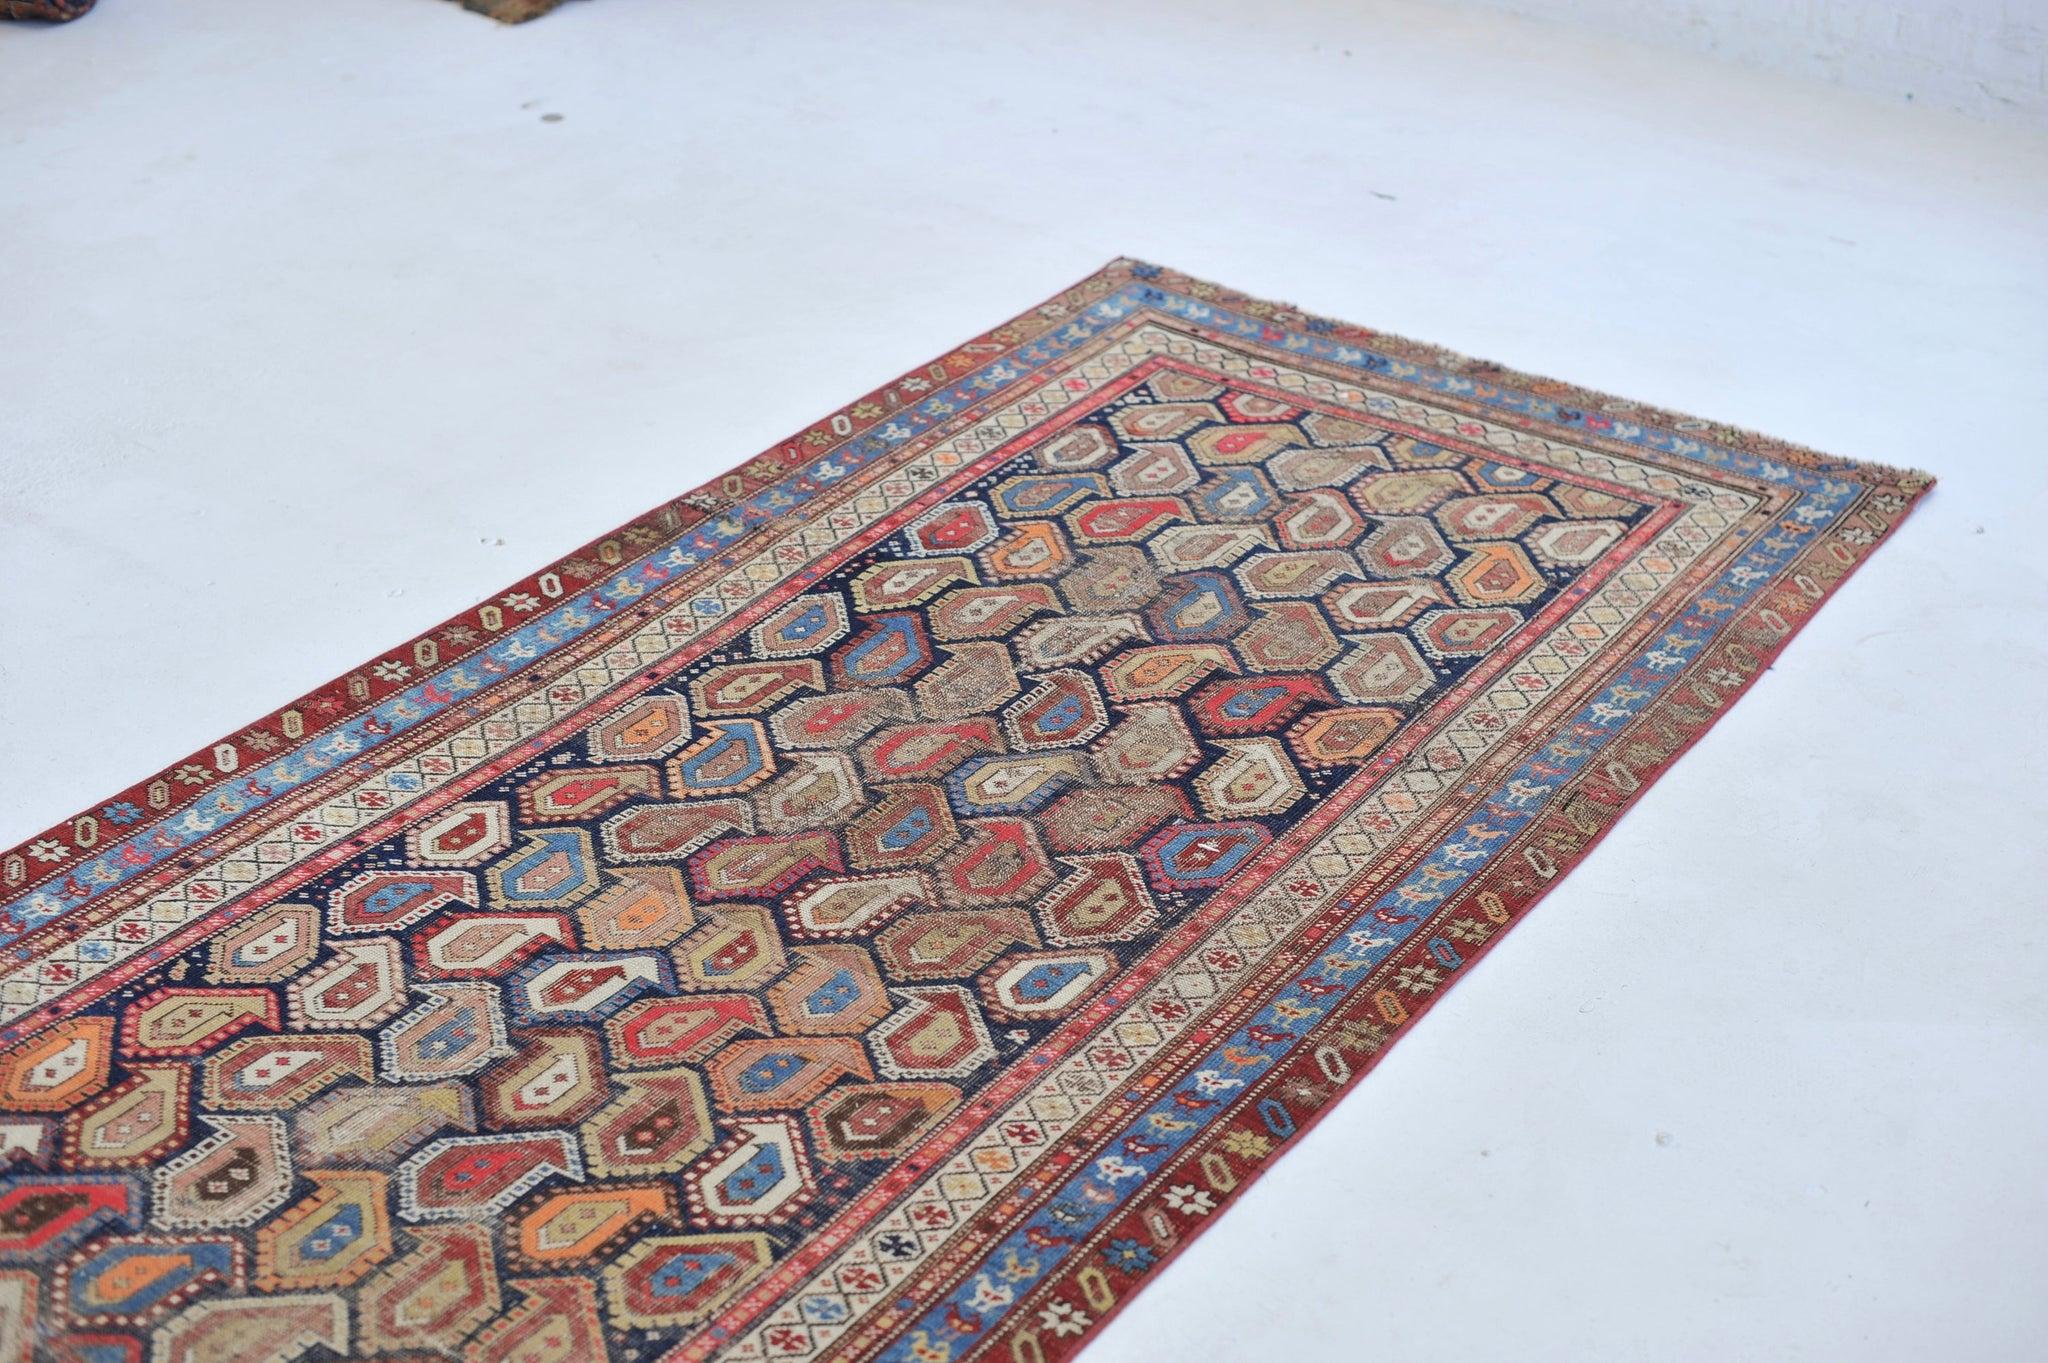 Gia Stylized All-Over Boteh Design Antique Rug

About: This is absolutely one of the more gorgeous antique runners we've ever seen. Stylized field of 